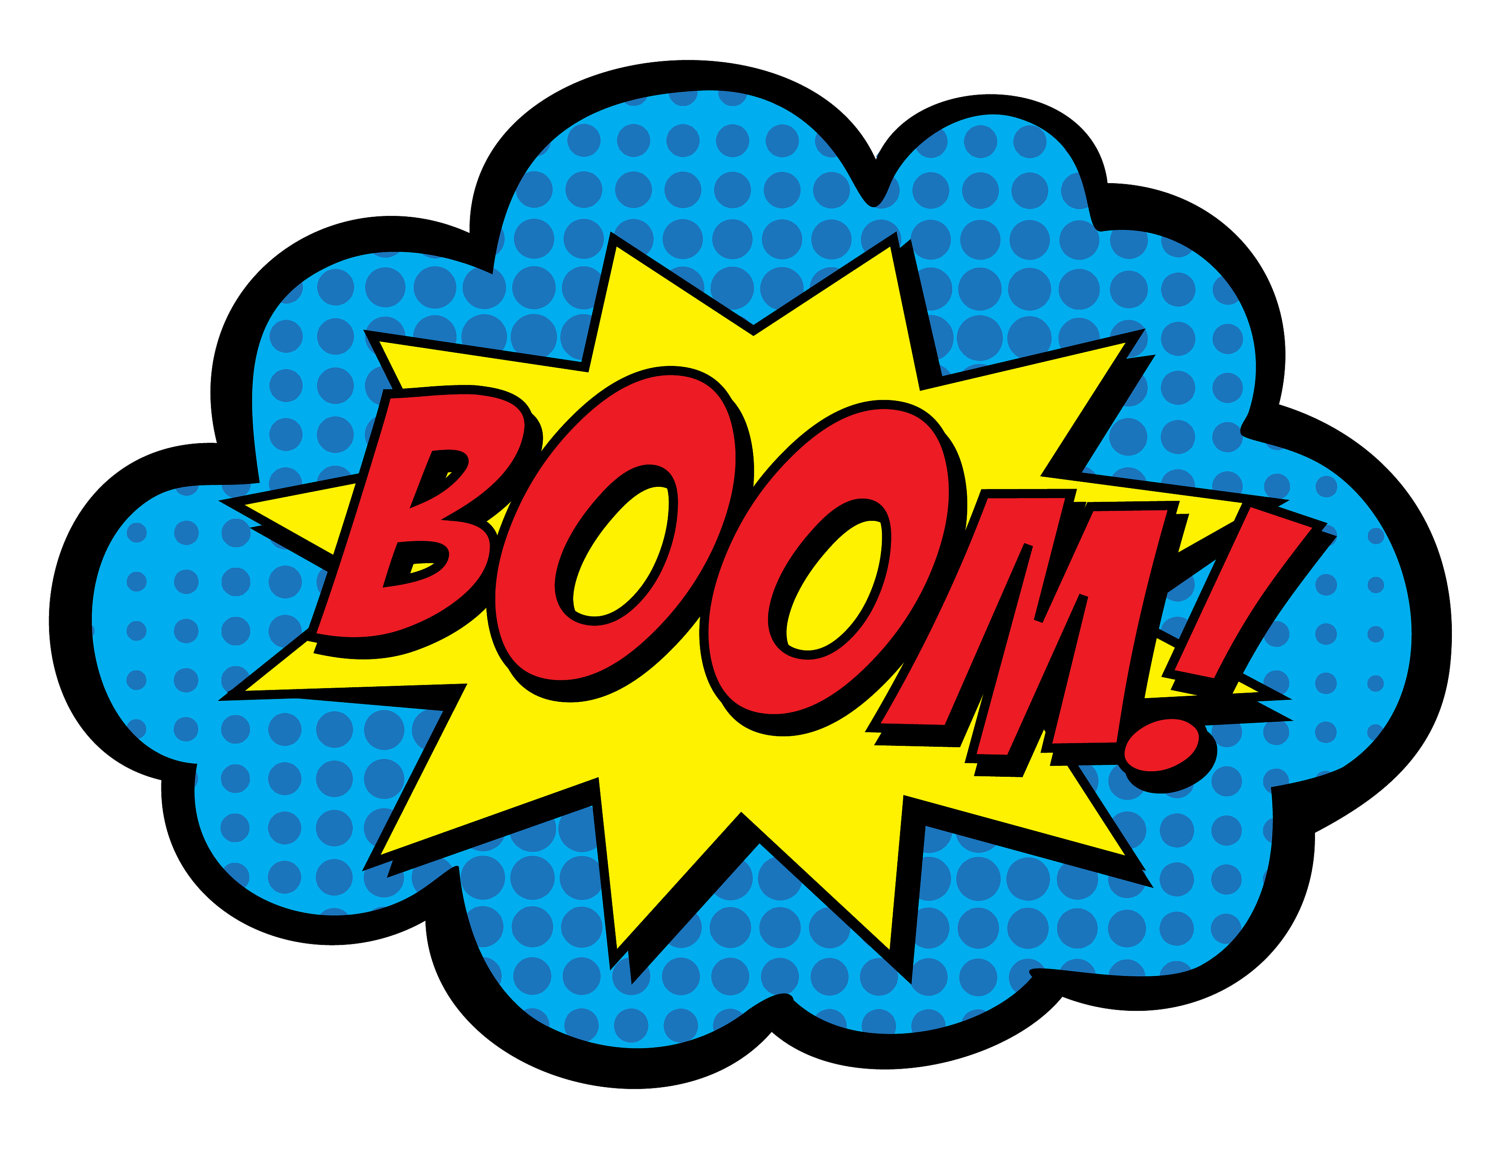 Boom clipart pow, Boom pow Transparent FREE for download on.